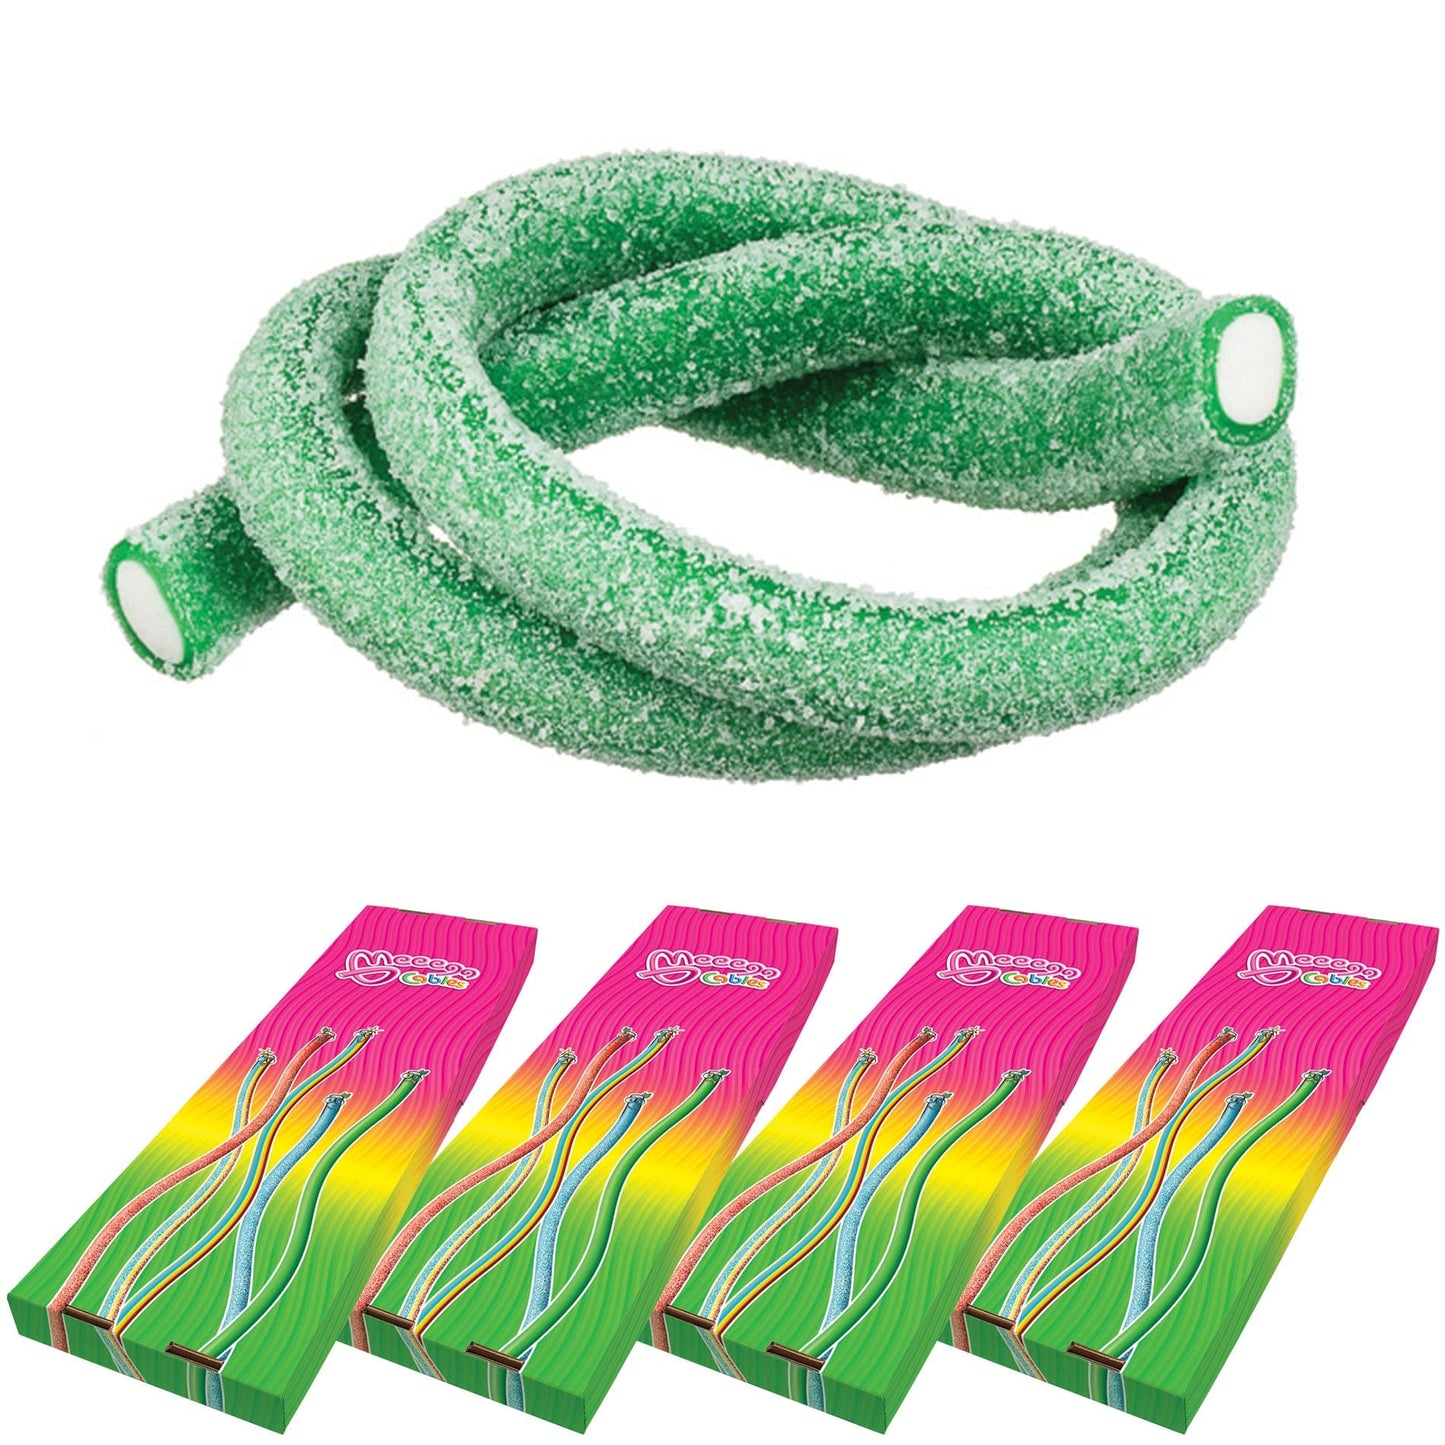 Novelty Concessions Gummy Rope SOUR APPLE / 4 Pack (120 pieces) Meeega Cables European Chewy Rope Candy - Box of 30 individually wrapped Meeega Cables, each over 2-feet long cups with lids and straws